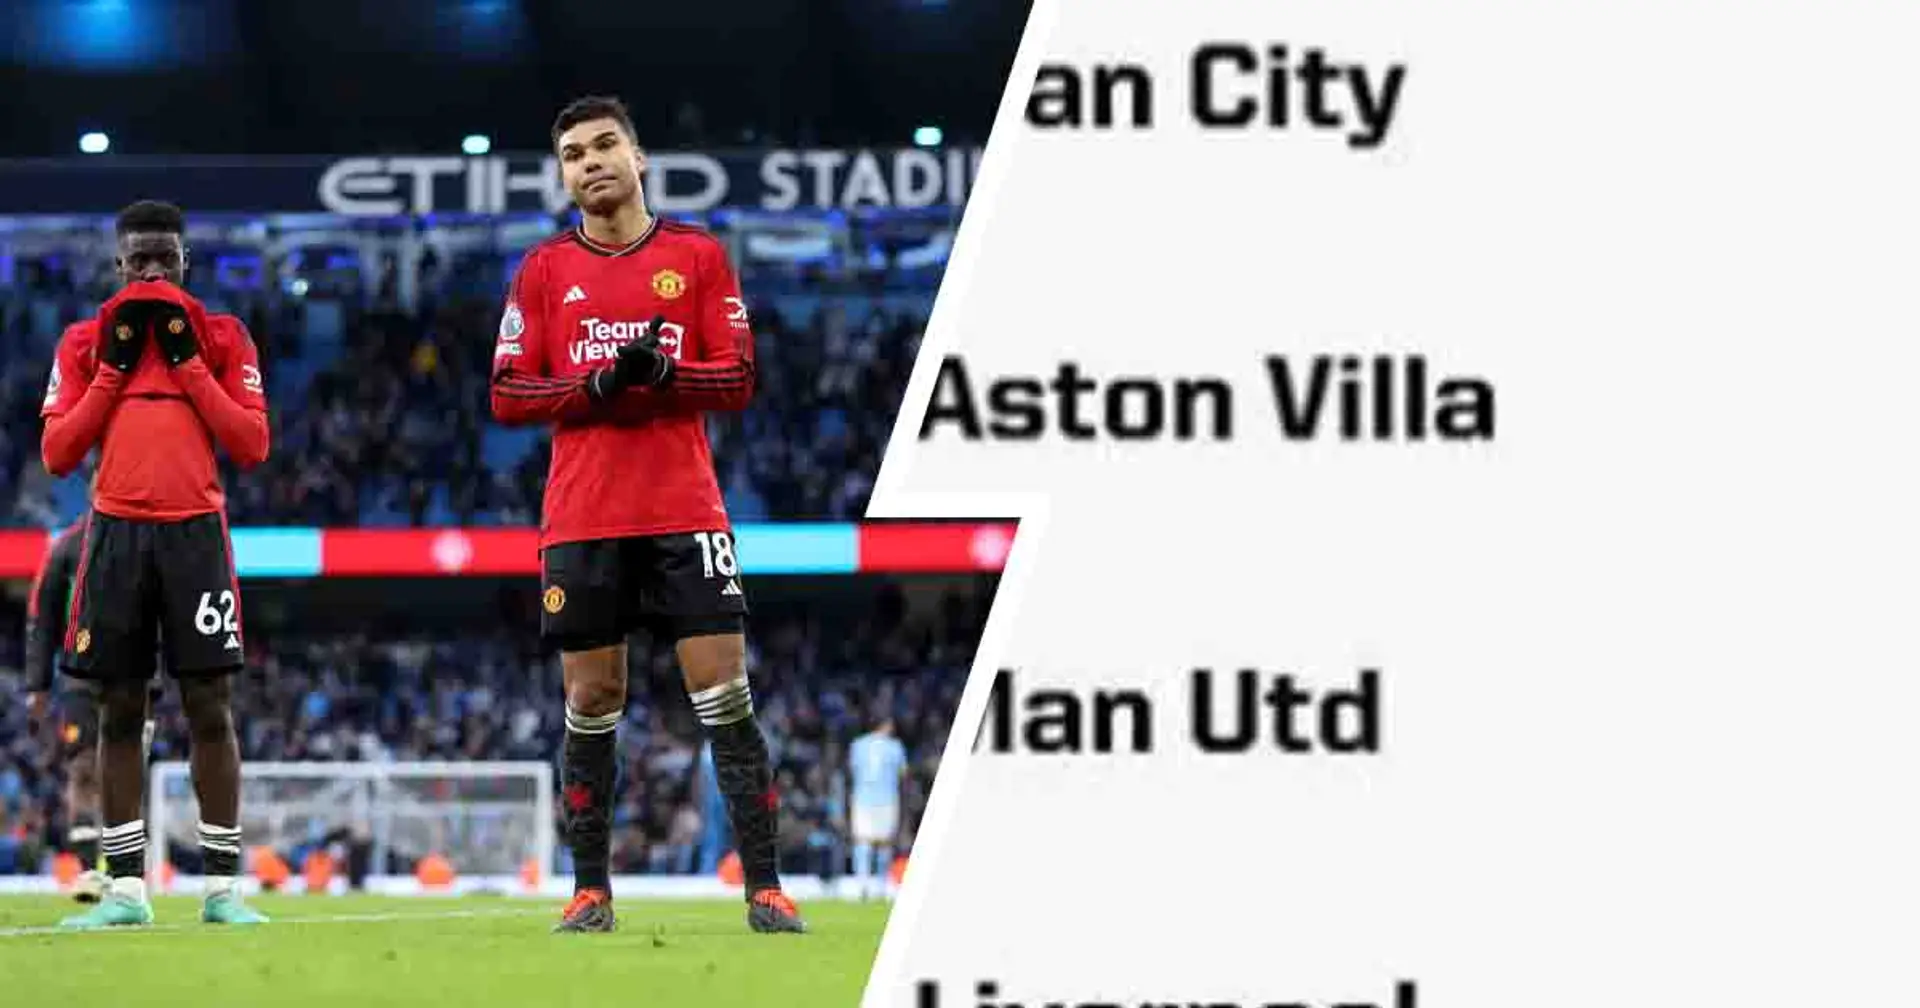 Man United's record against Premier League top-6 opponents revealed - more wins than Liverpool